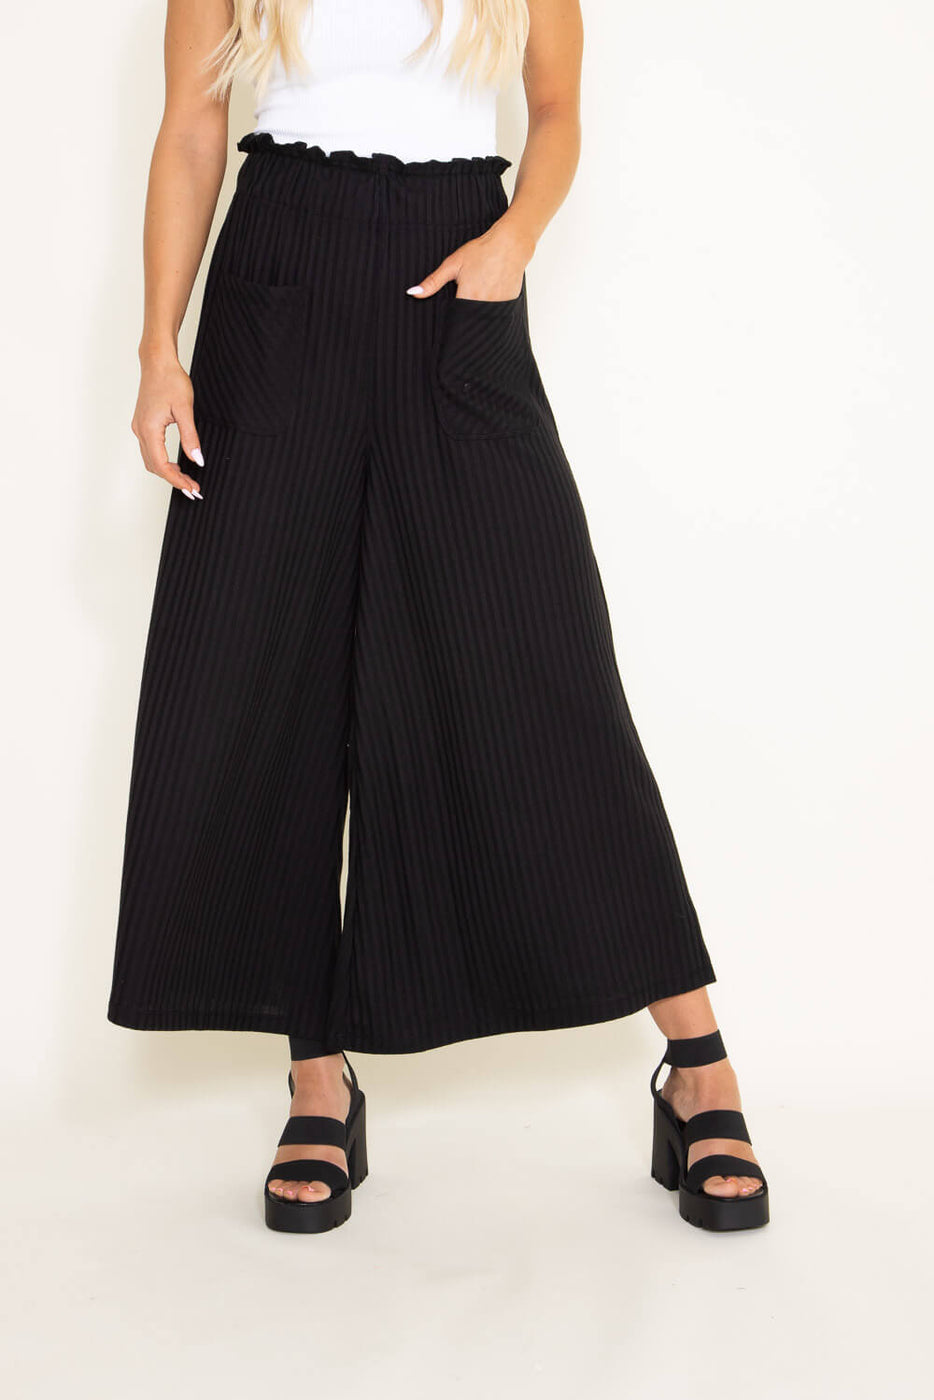 Women's Wide Leg Palazzo Pants, Fashion Ruffle Elastic High Waisted Solid  Color Plus Size Cropped Flowy Light Trousers